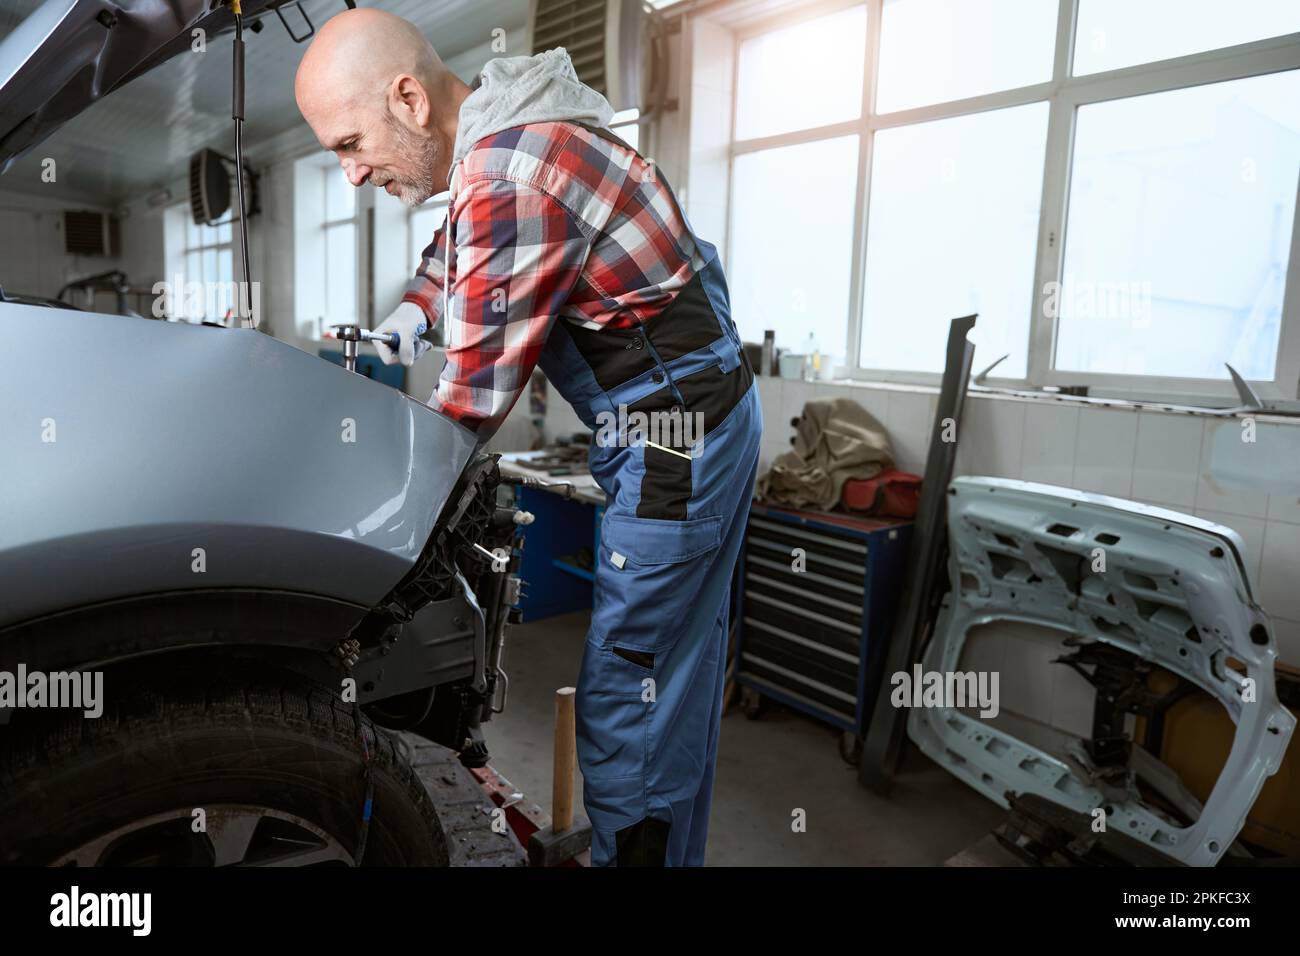 Auto repairman at the workplace repairs a car Stock Photo